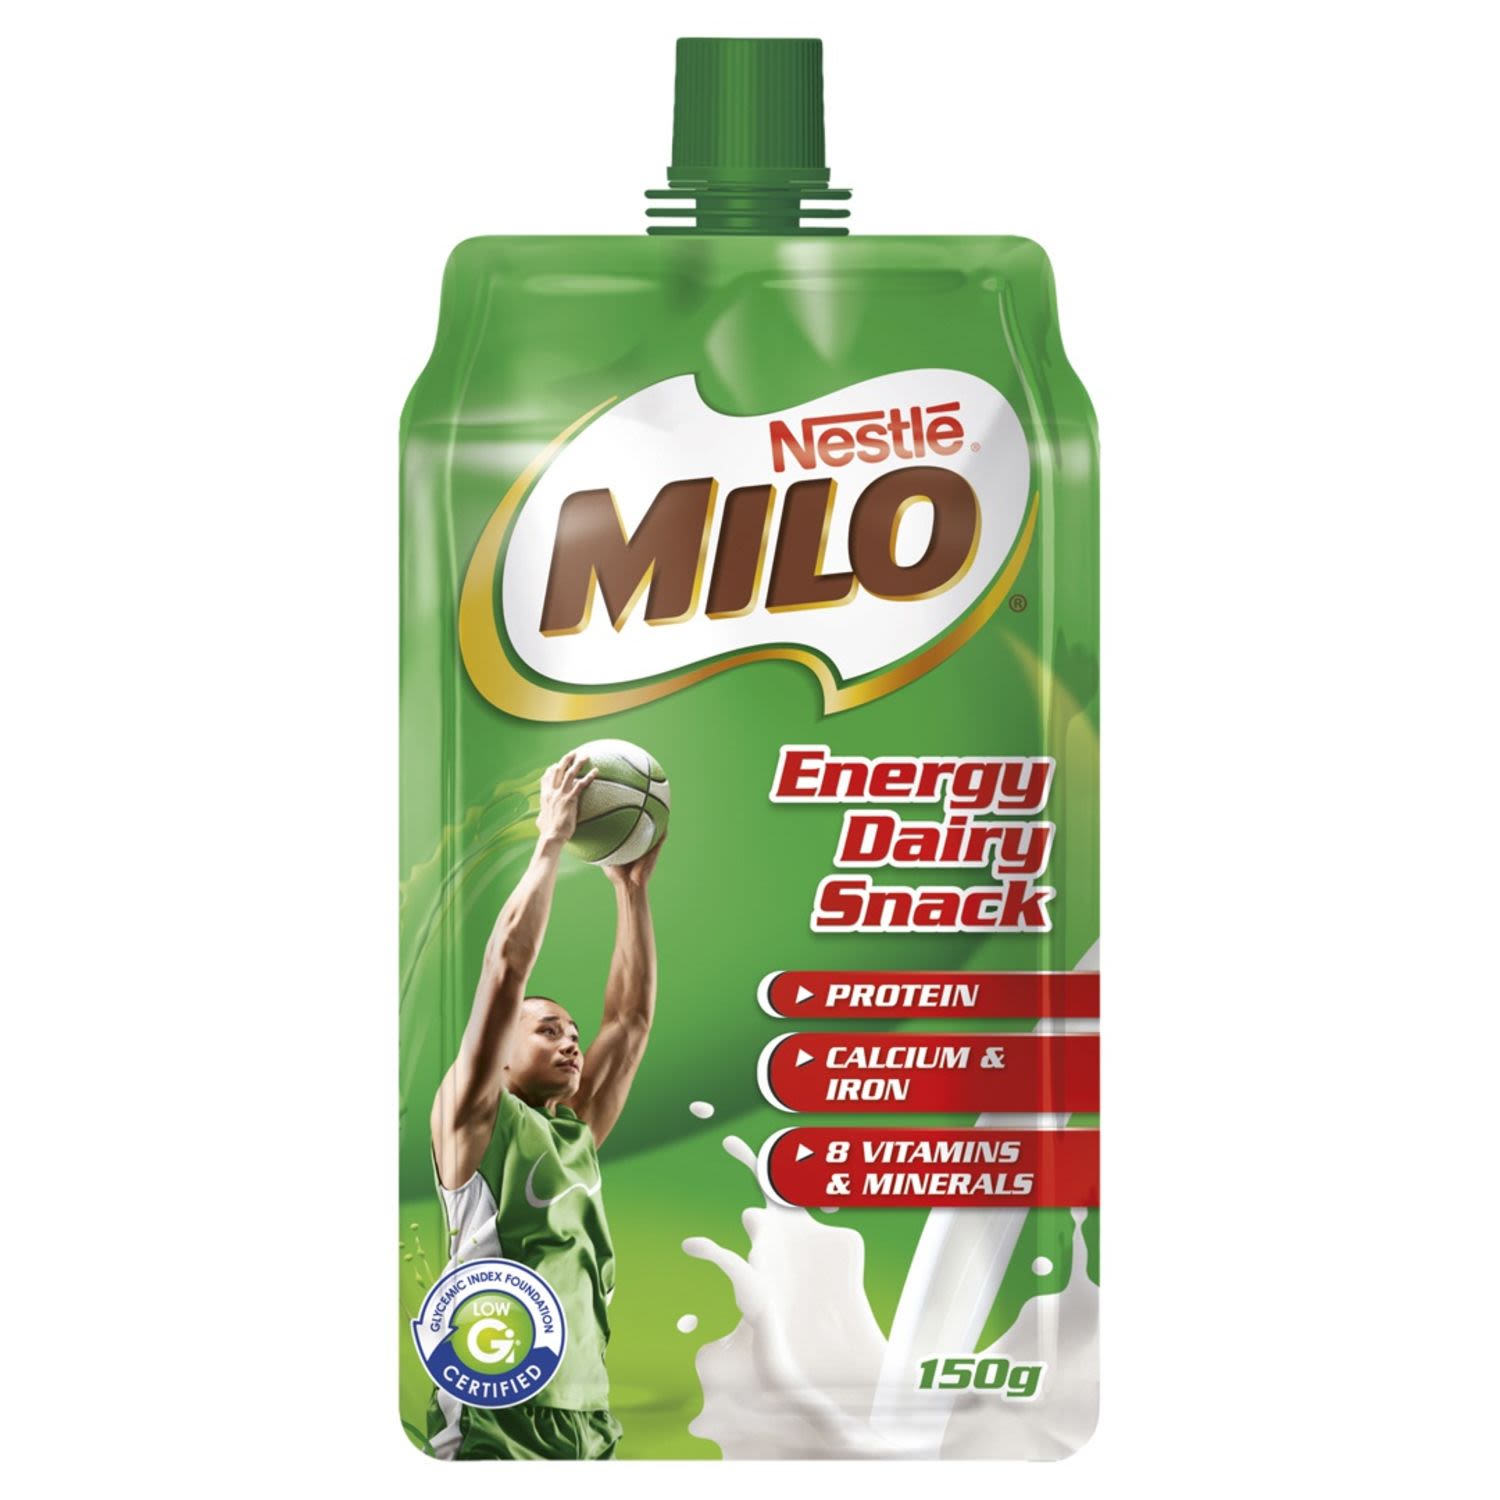 Milo Energy Dairy Snack gives kids energy to help them perform. Each serve is a good source of calcium.<br /> <br />